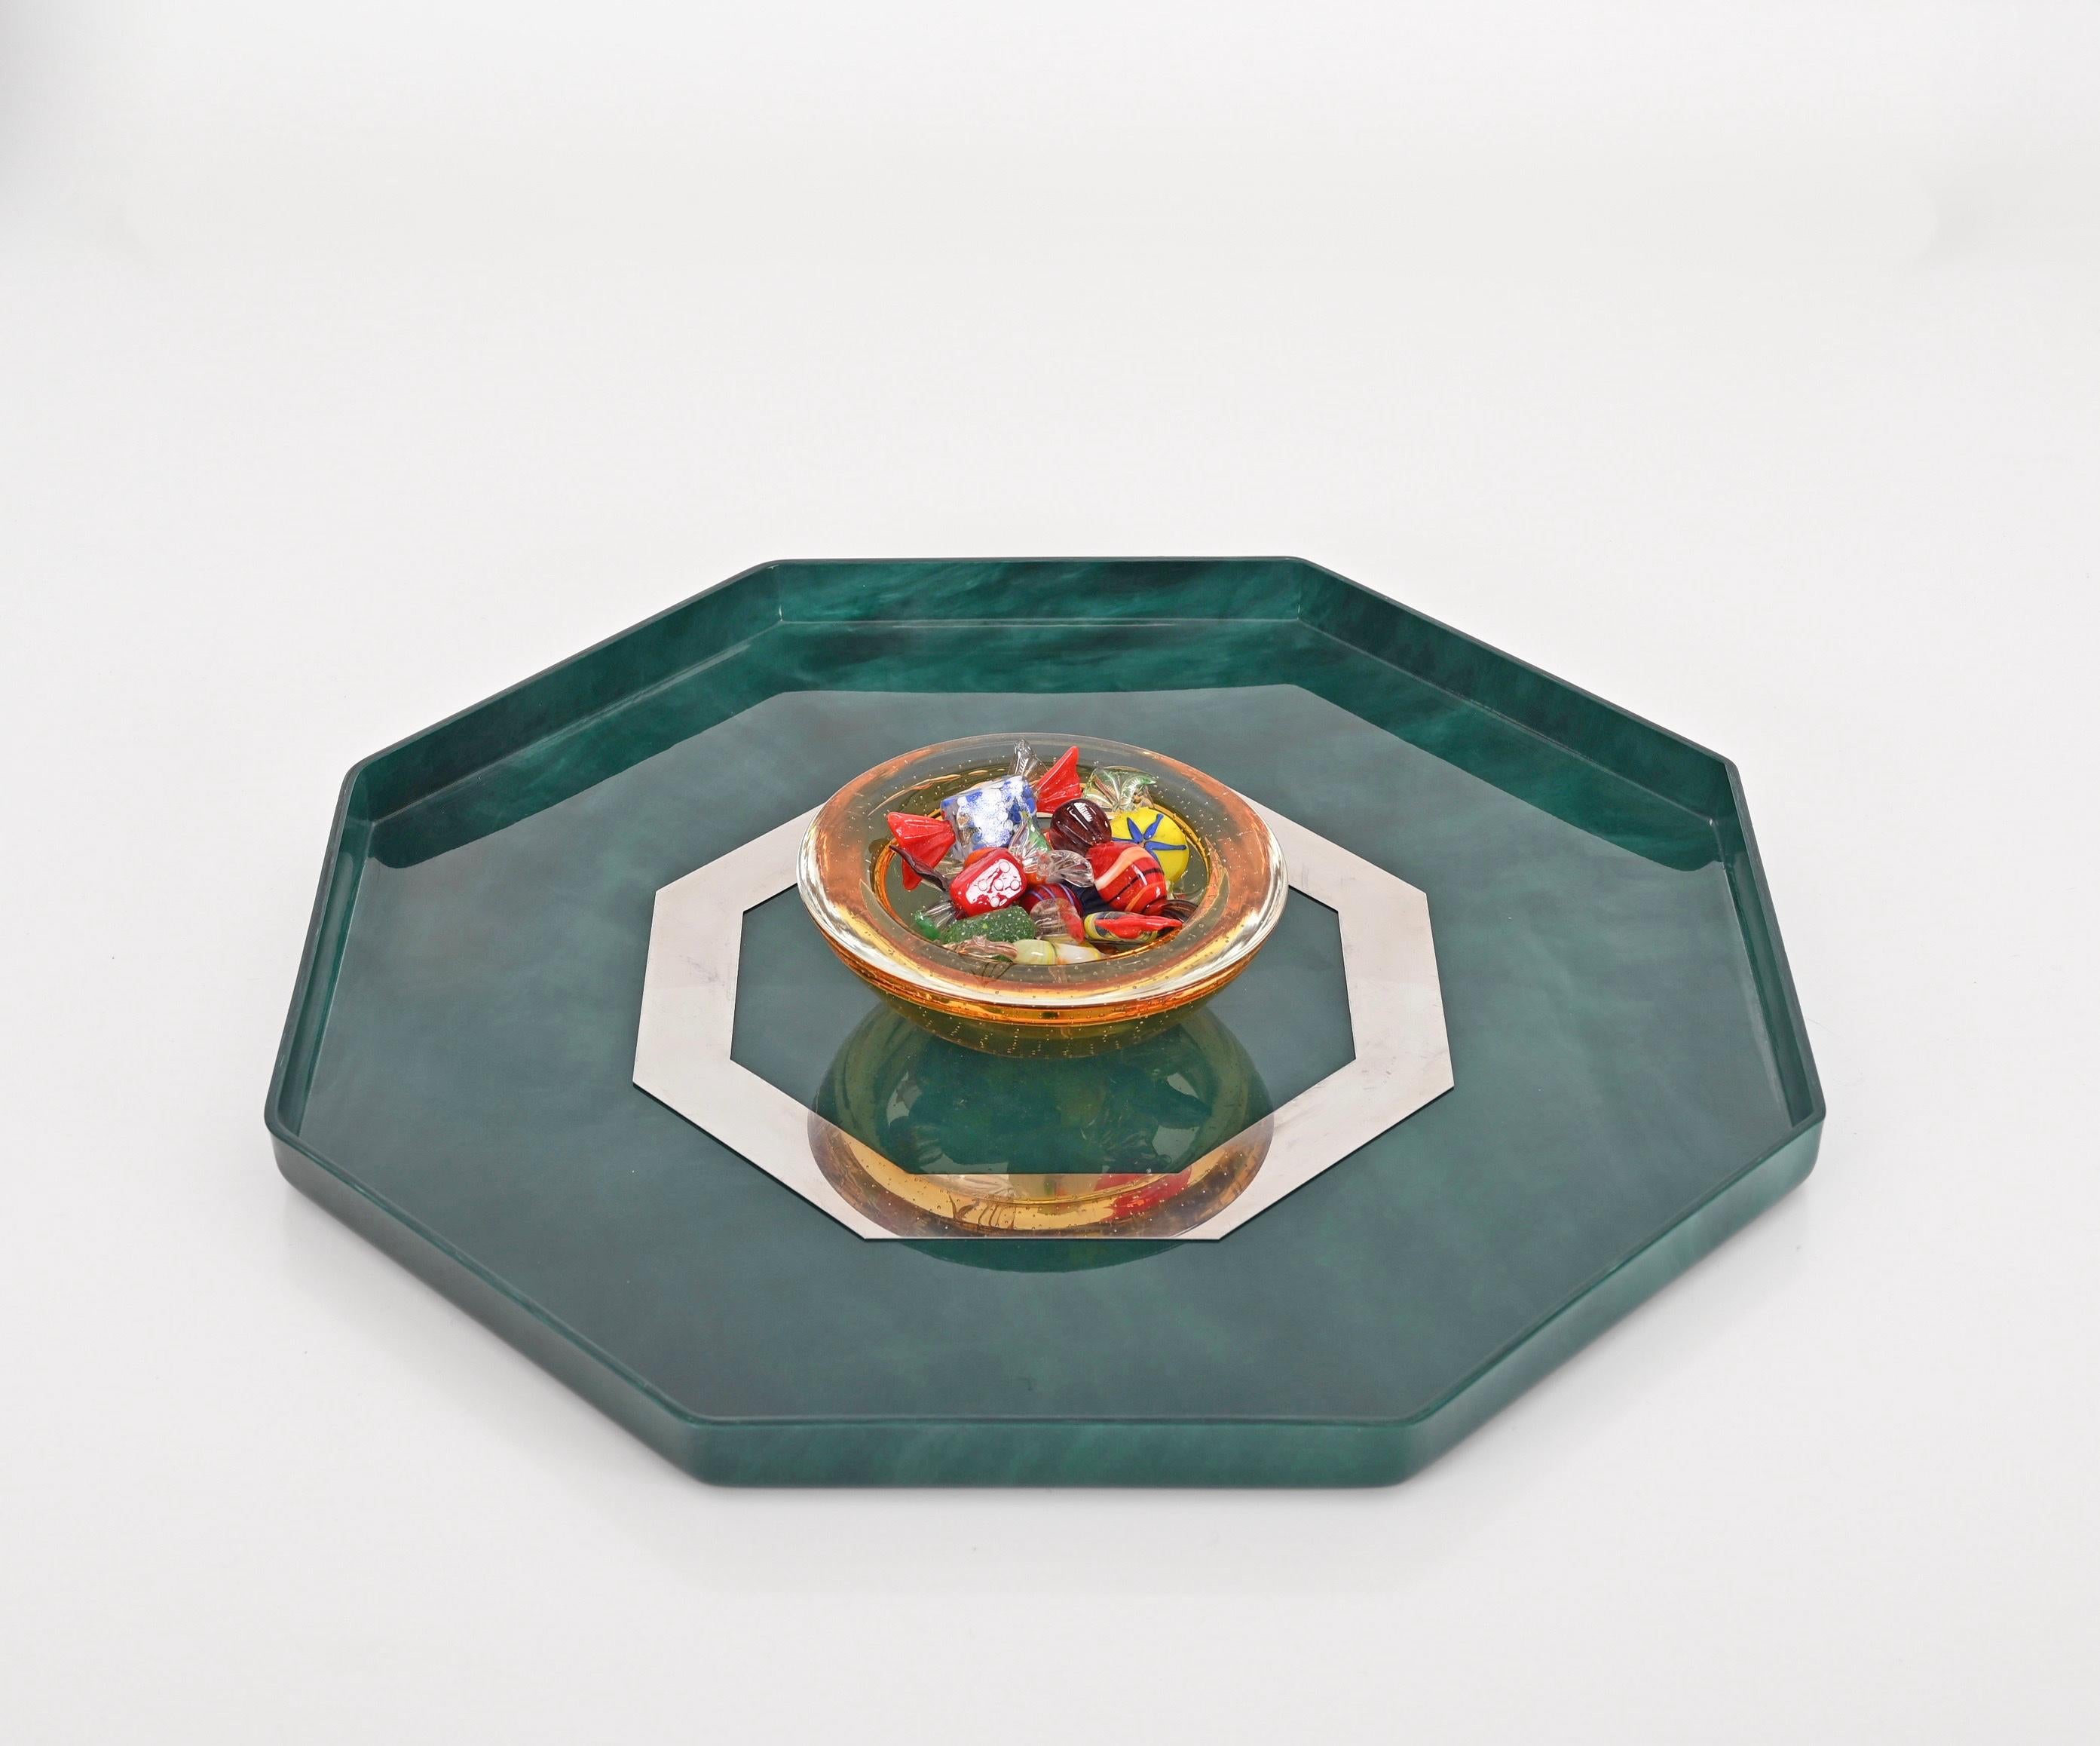 Wonderful midcentury octagonal serving tray in a stunning marble effect green lucite and chrome. This beautiful centerpiece was made in Italy in the 1980s in the style of Willy Rizzo.

The contrast between the emerald green lucite and the chromed